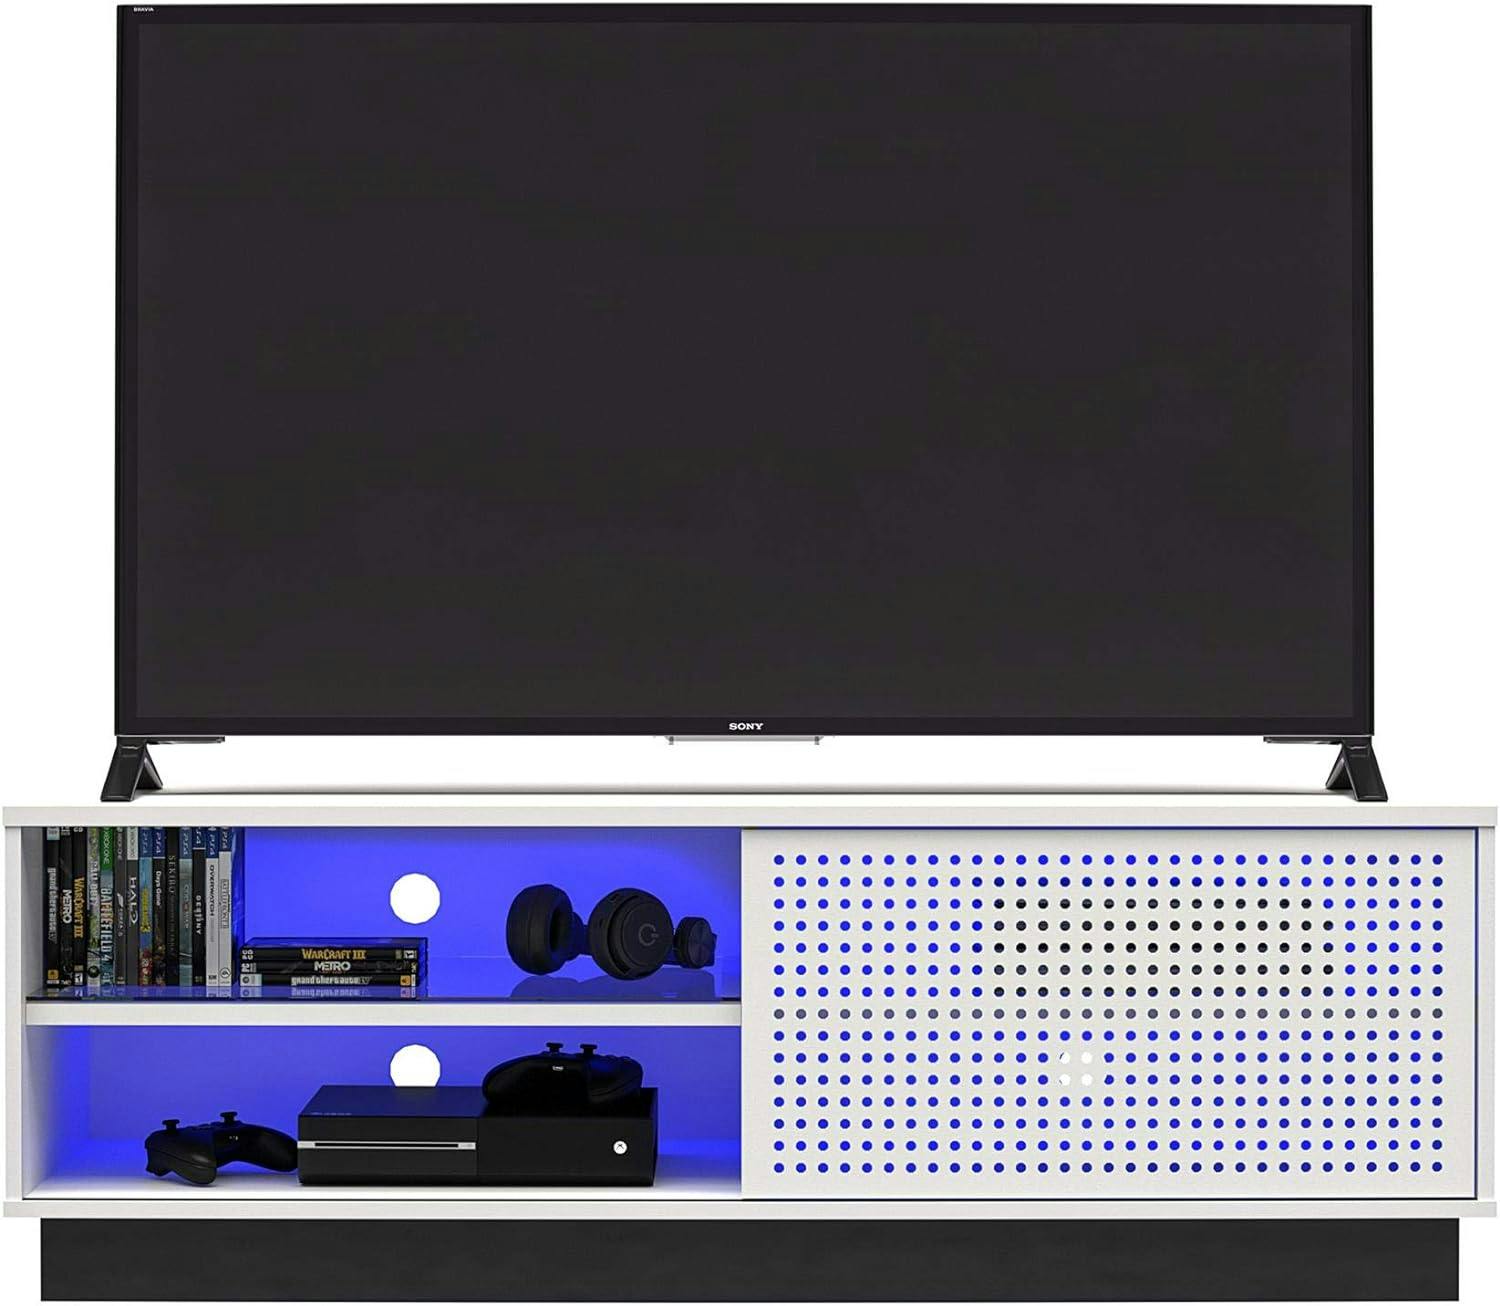 Contemporary White Gamer TV Stand with LED & Wire Management